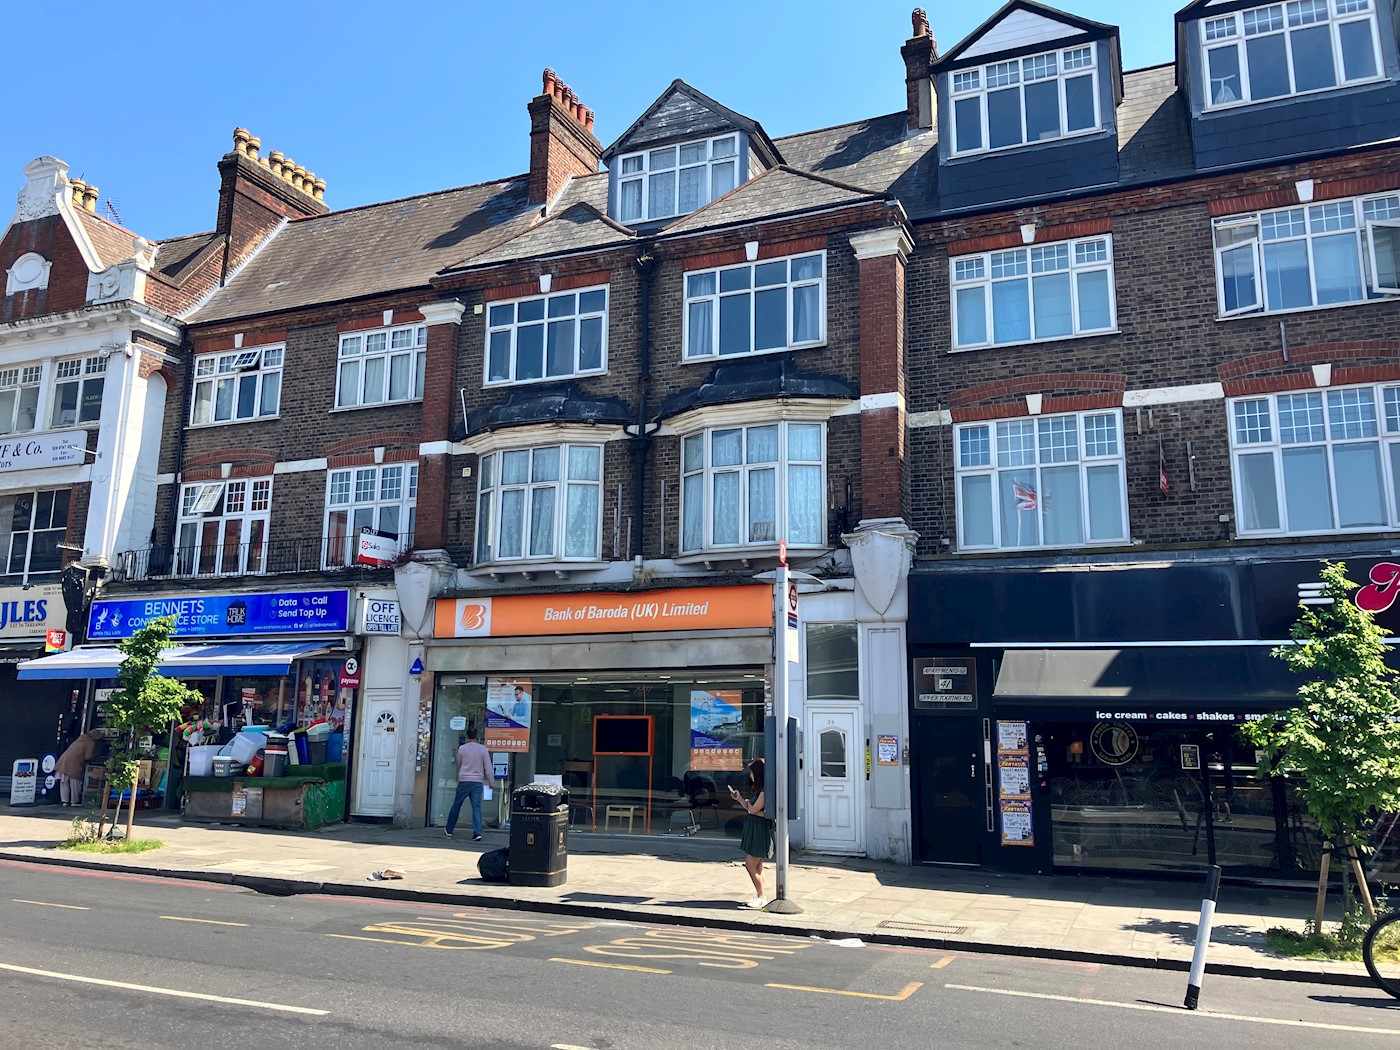 39 Upper Tooting Road, Tooting Bec, SW17 7TR 1/8